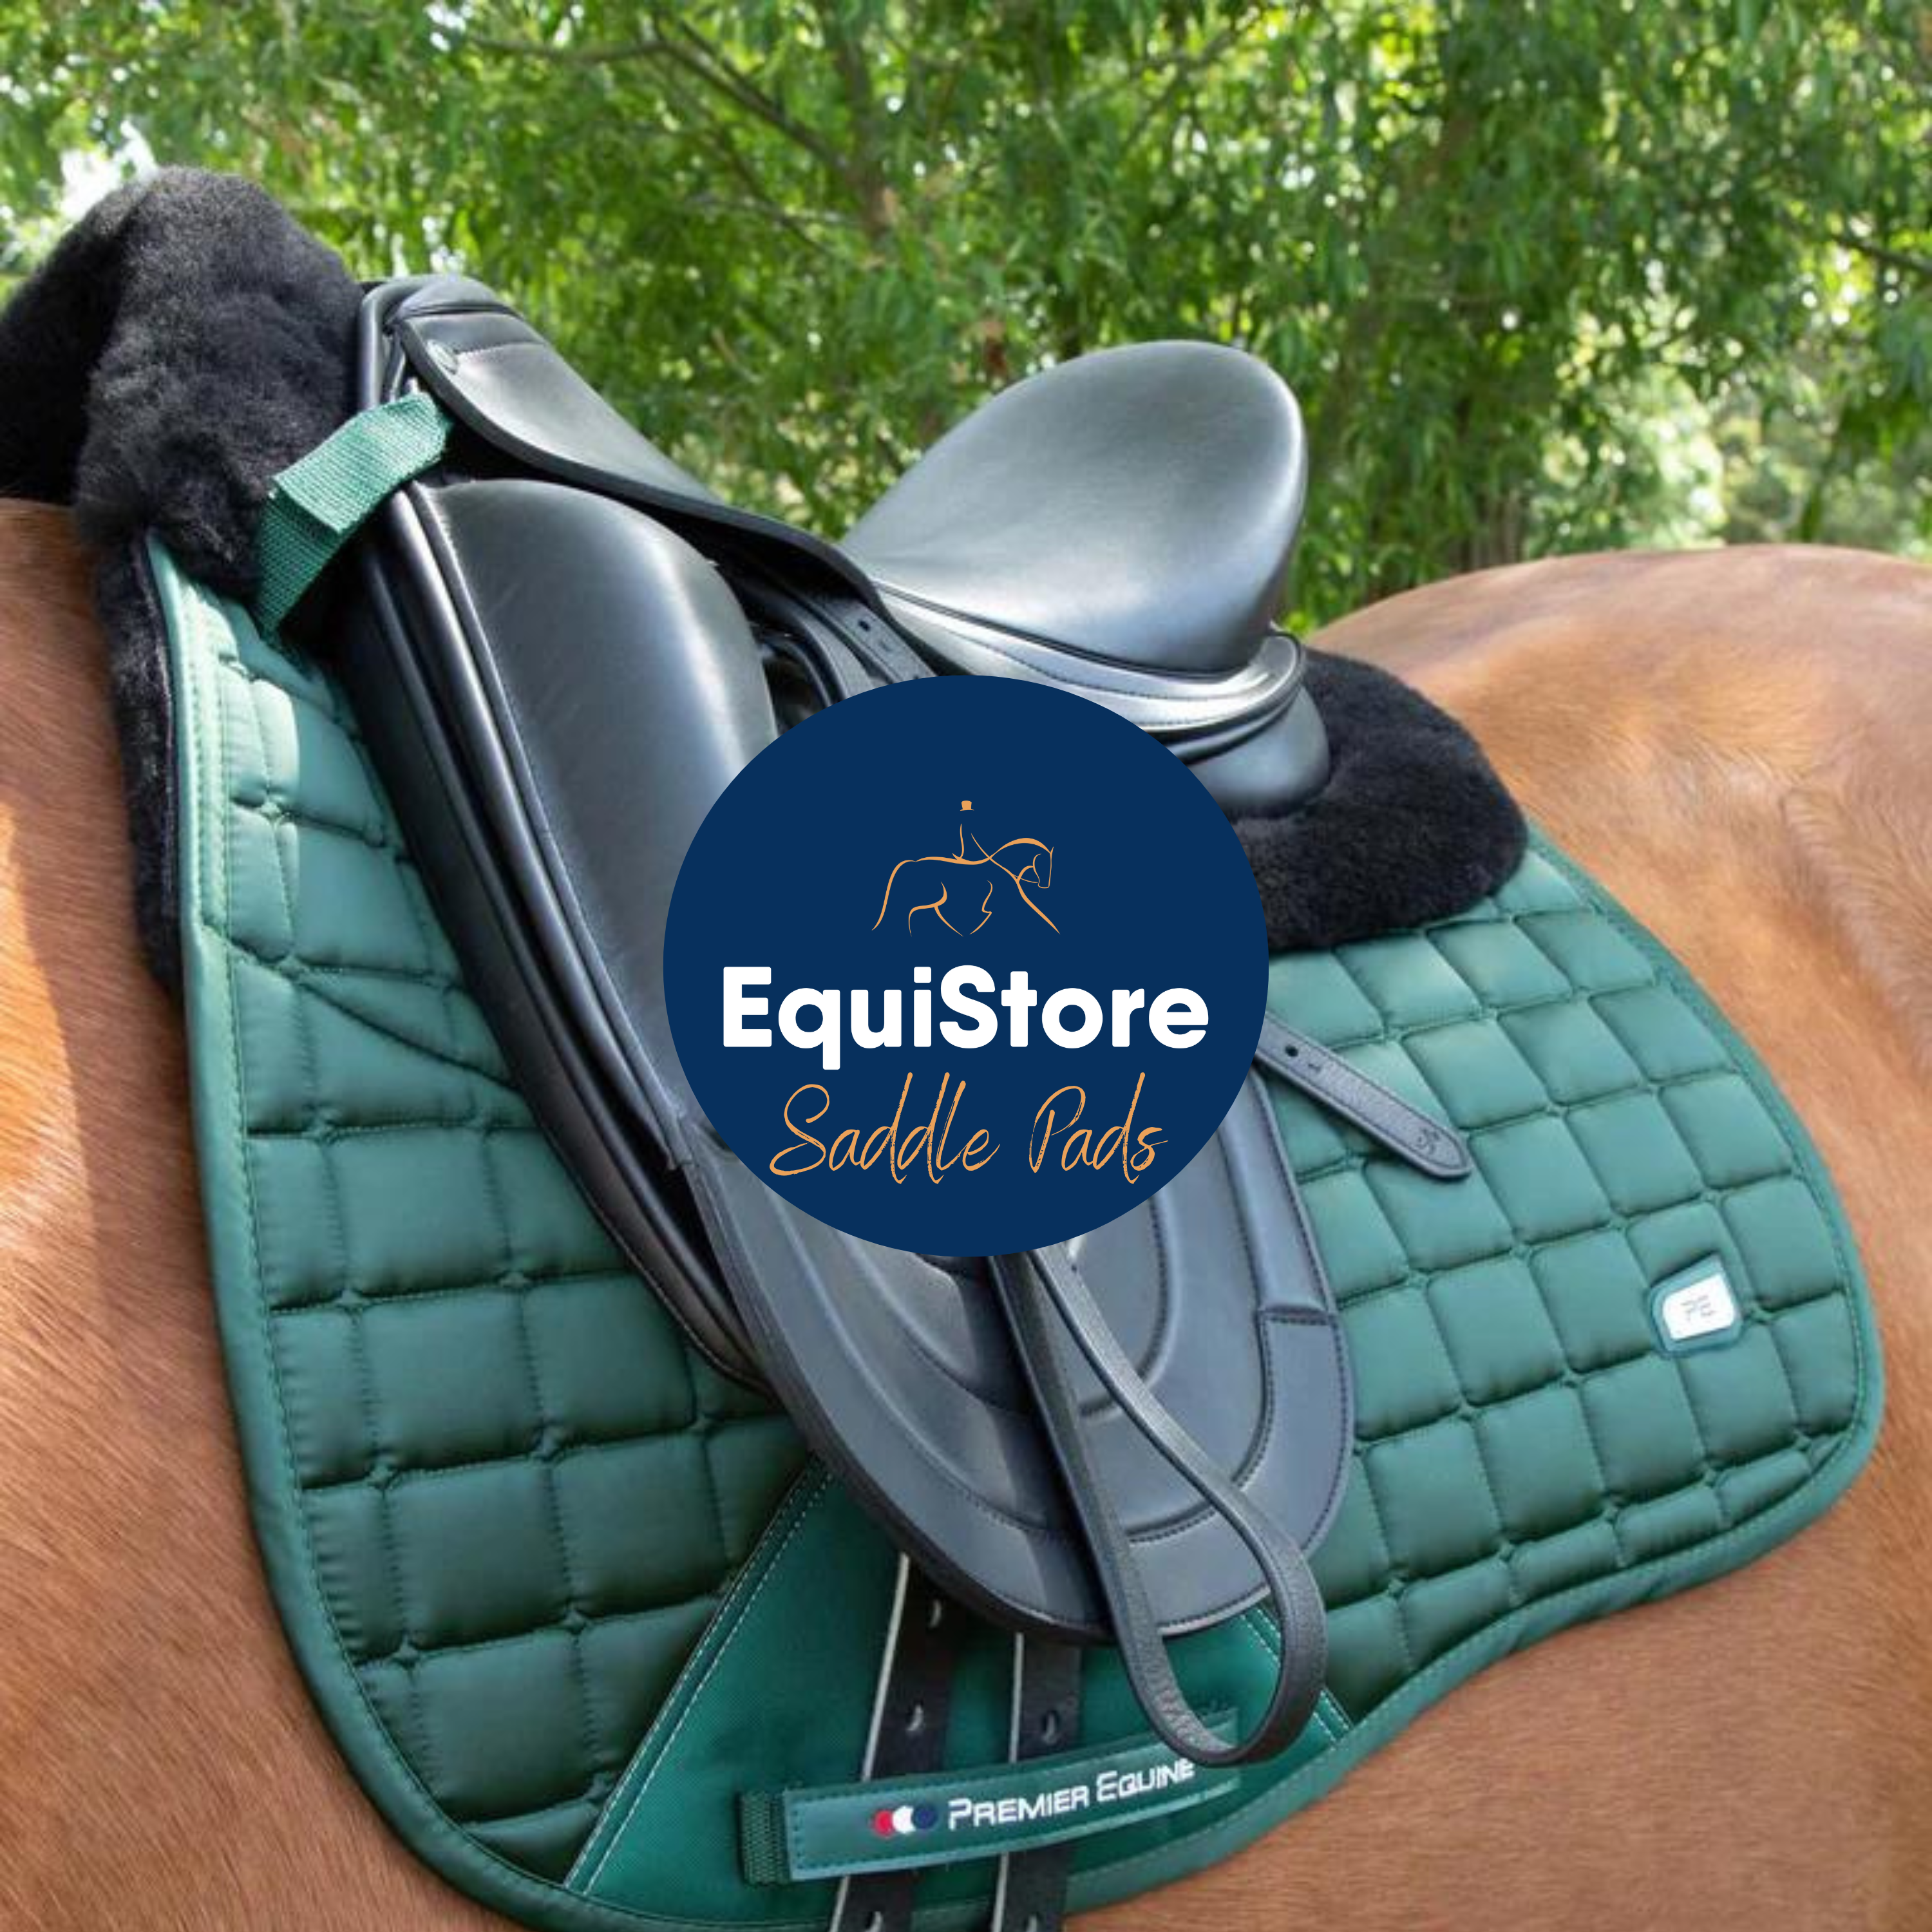 A wide selection of saddle pads and numnahs for your horse or pony, for all disciplines such as general purpose, jumping and dressage. Available in Ireland from Equistore. 